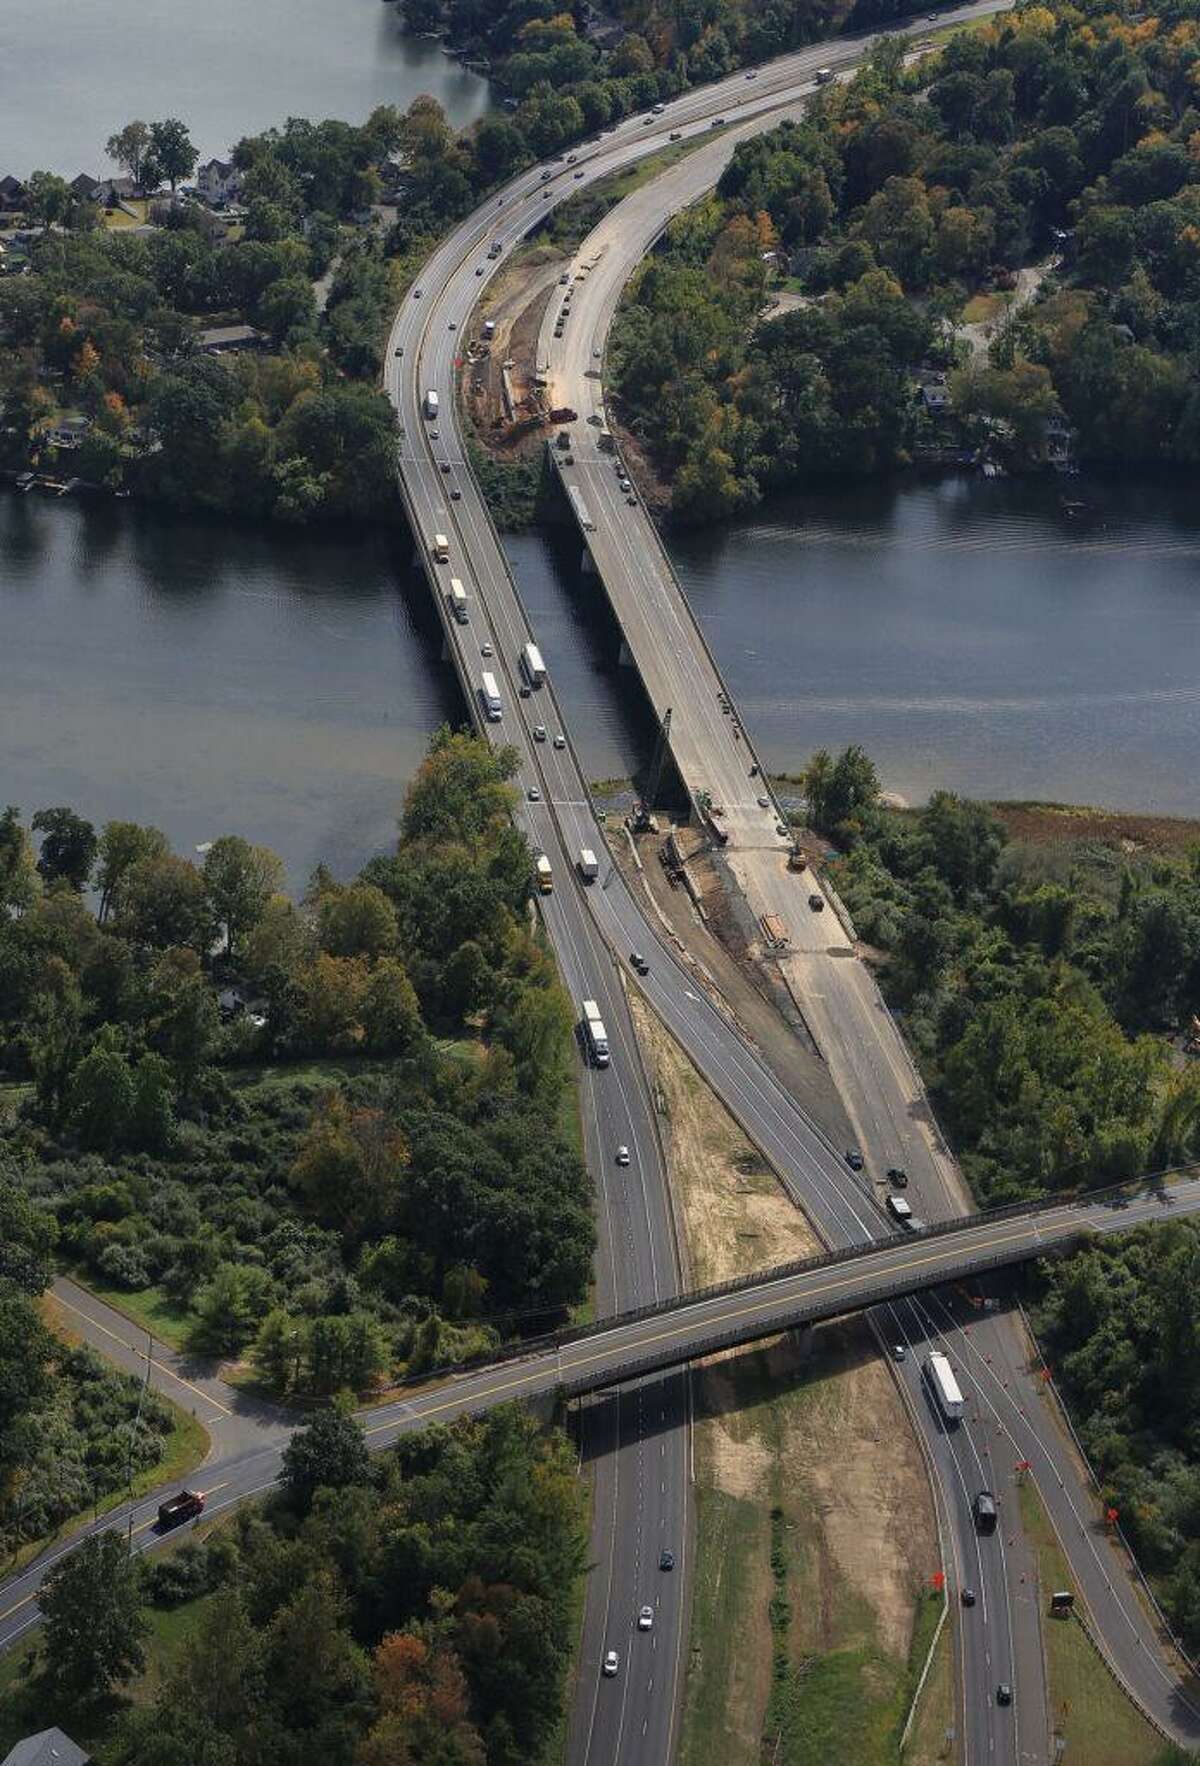 The Rochambeau Bridge between Newtown and Southbury, which carries I-84 over the Housatonic River, is undergoing a renovation by the state Department of Transportation.